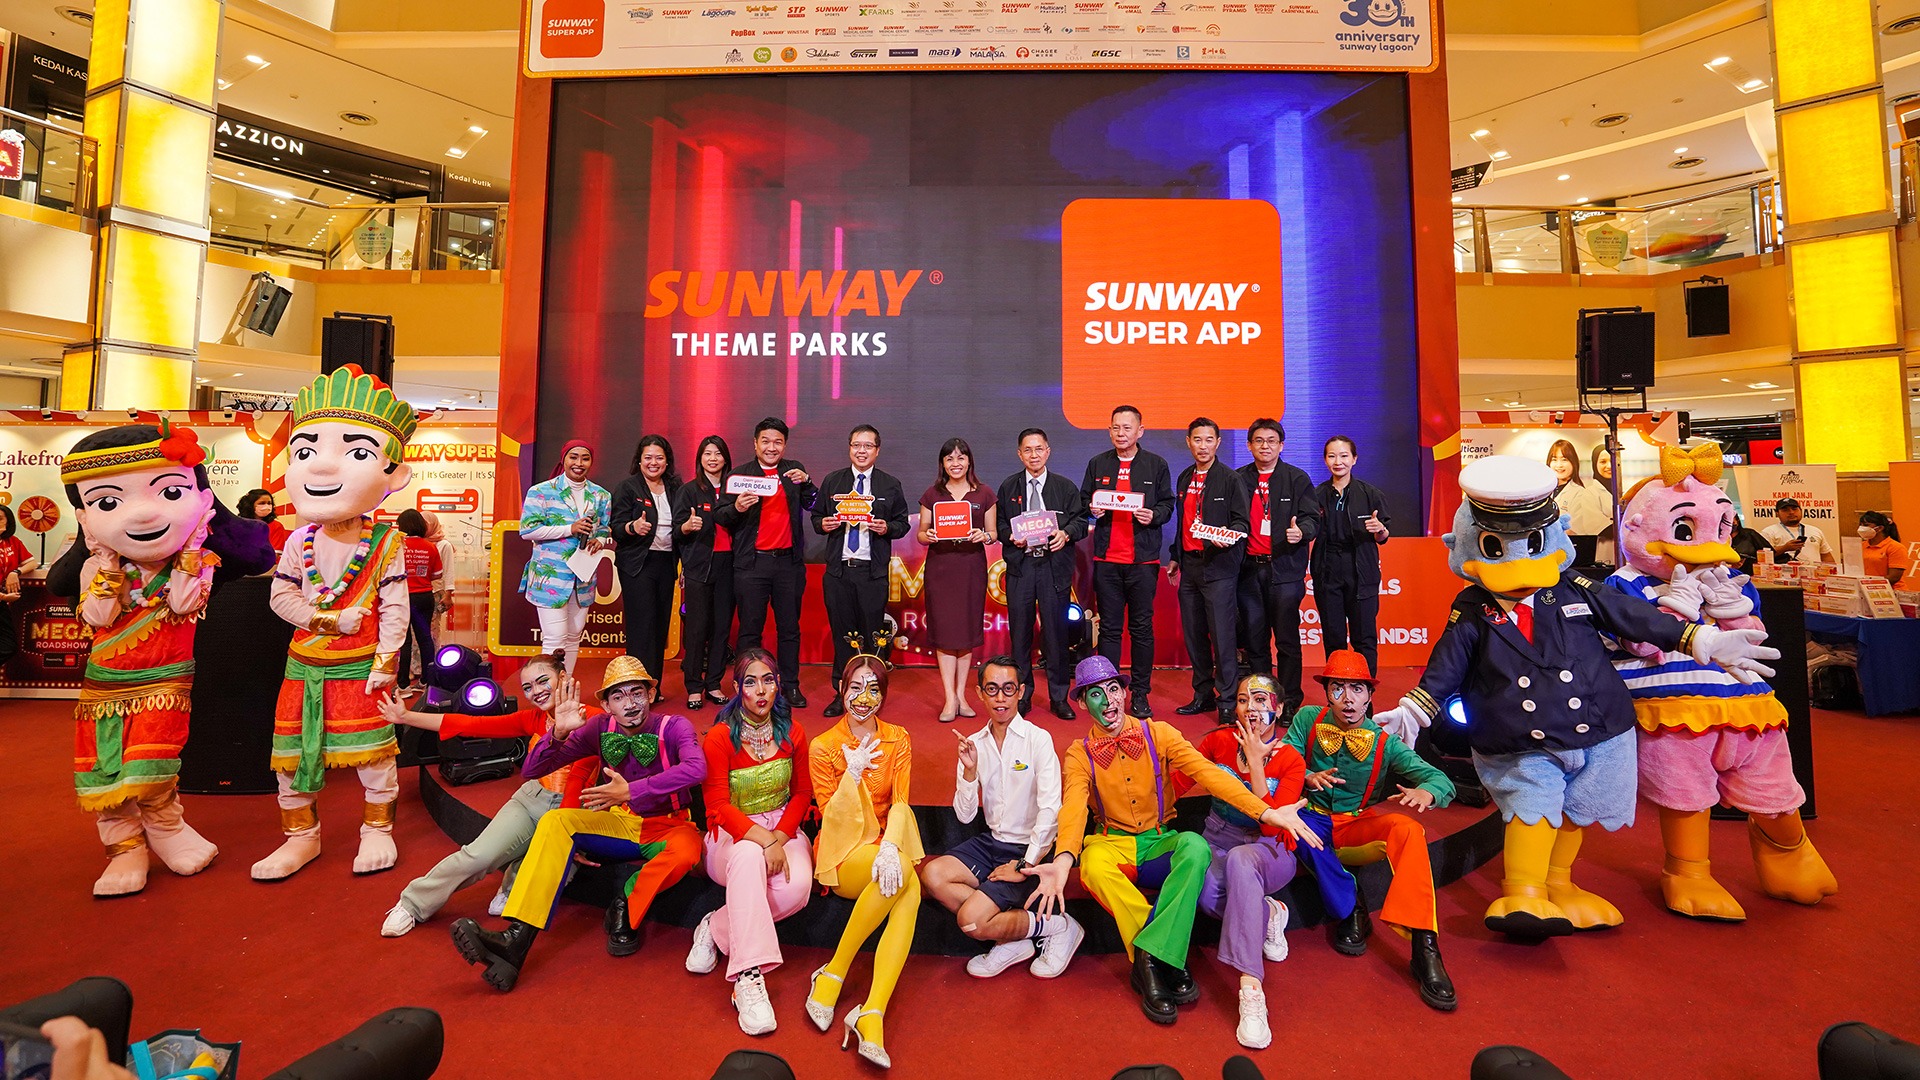 Sunway Super App is Sunway’s brand-new one-stop lifestyle super app that offers users products and services across Sunway’s businesses divisions; gives access to more than 1,500 of Sunway’s business partners and retail merchants.